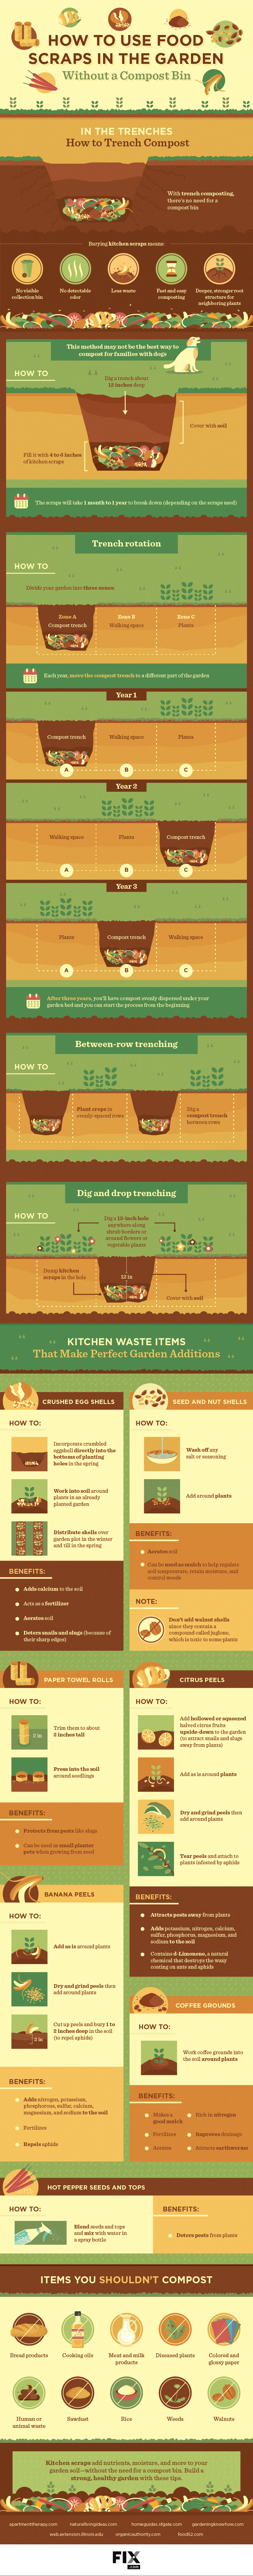 Trench composting is great to make lazy compost